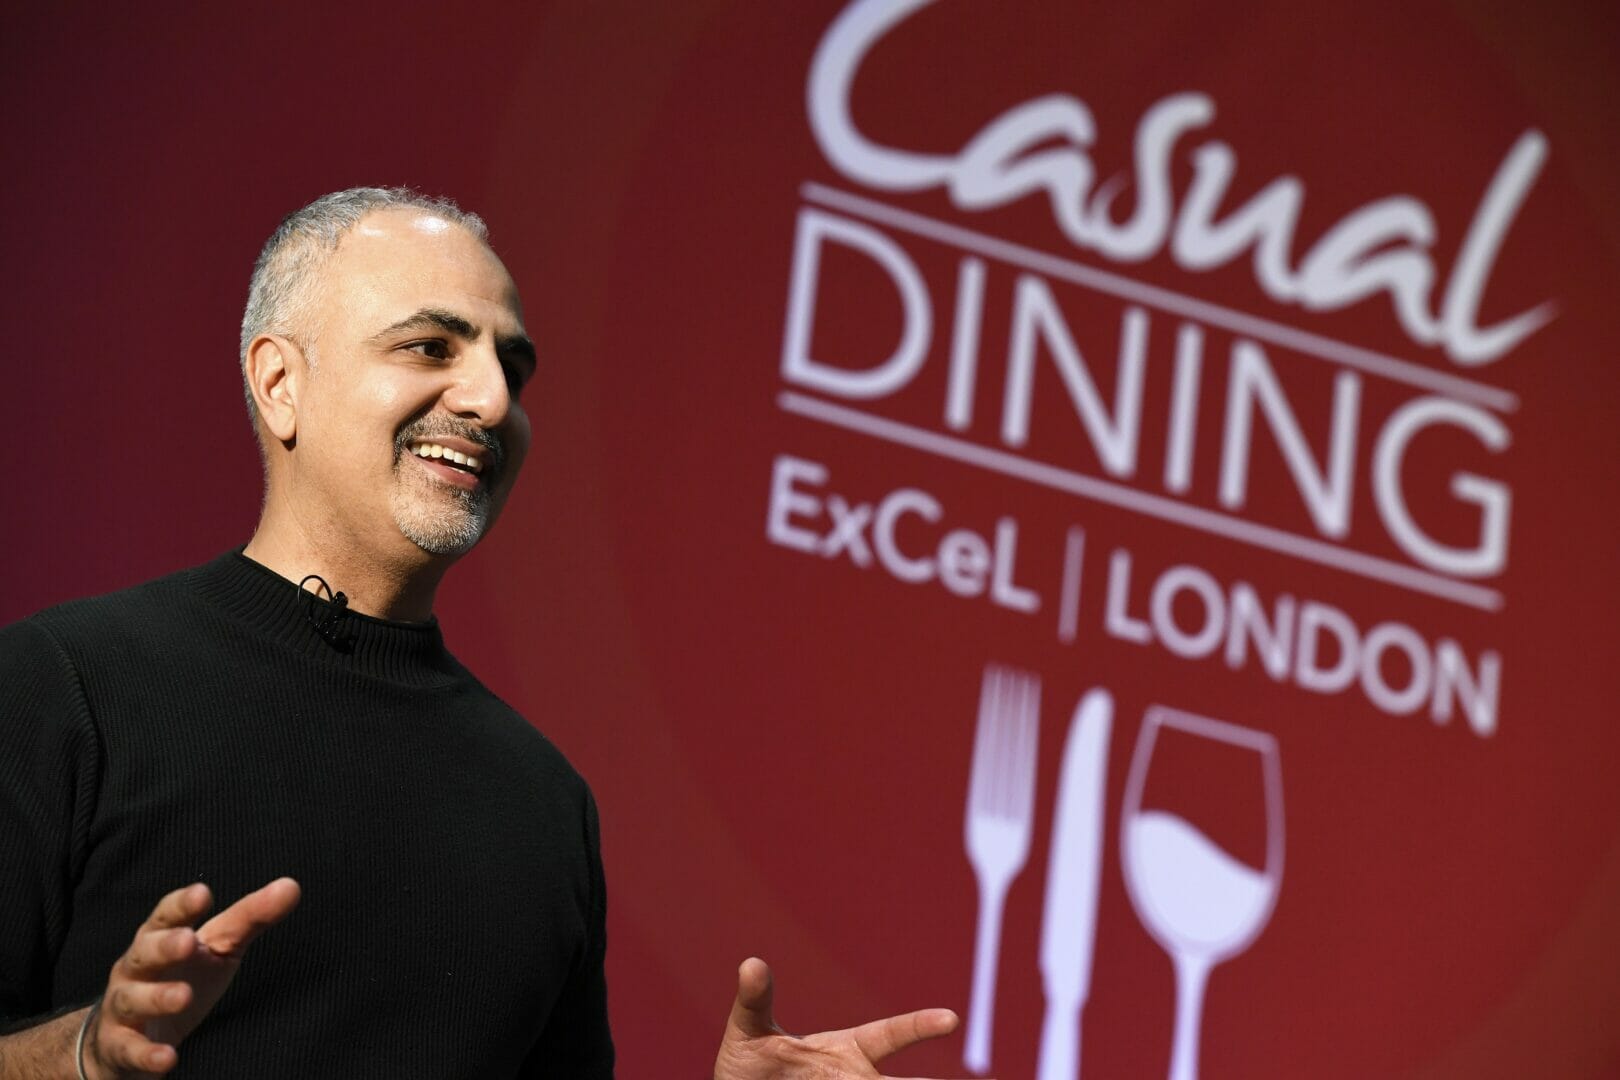 Casual Dining goes big with first Keynote announcement for 2020